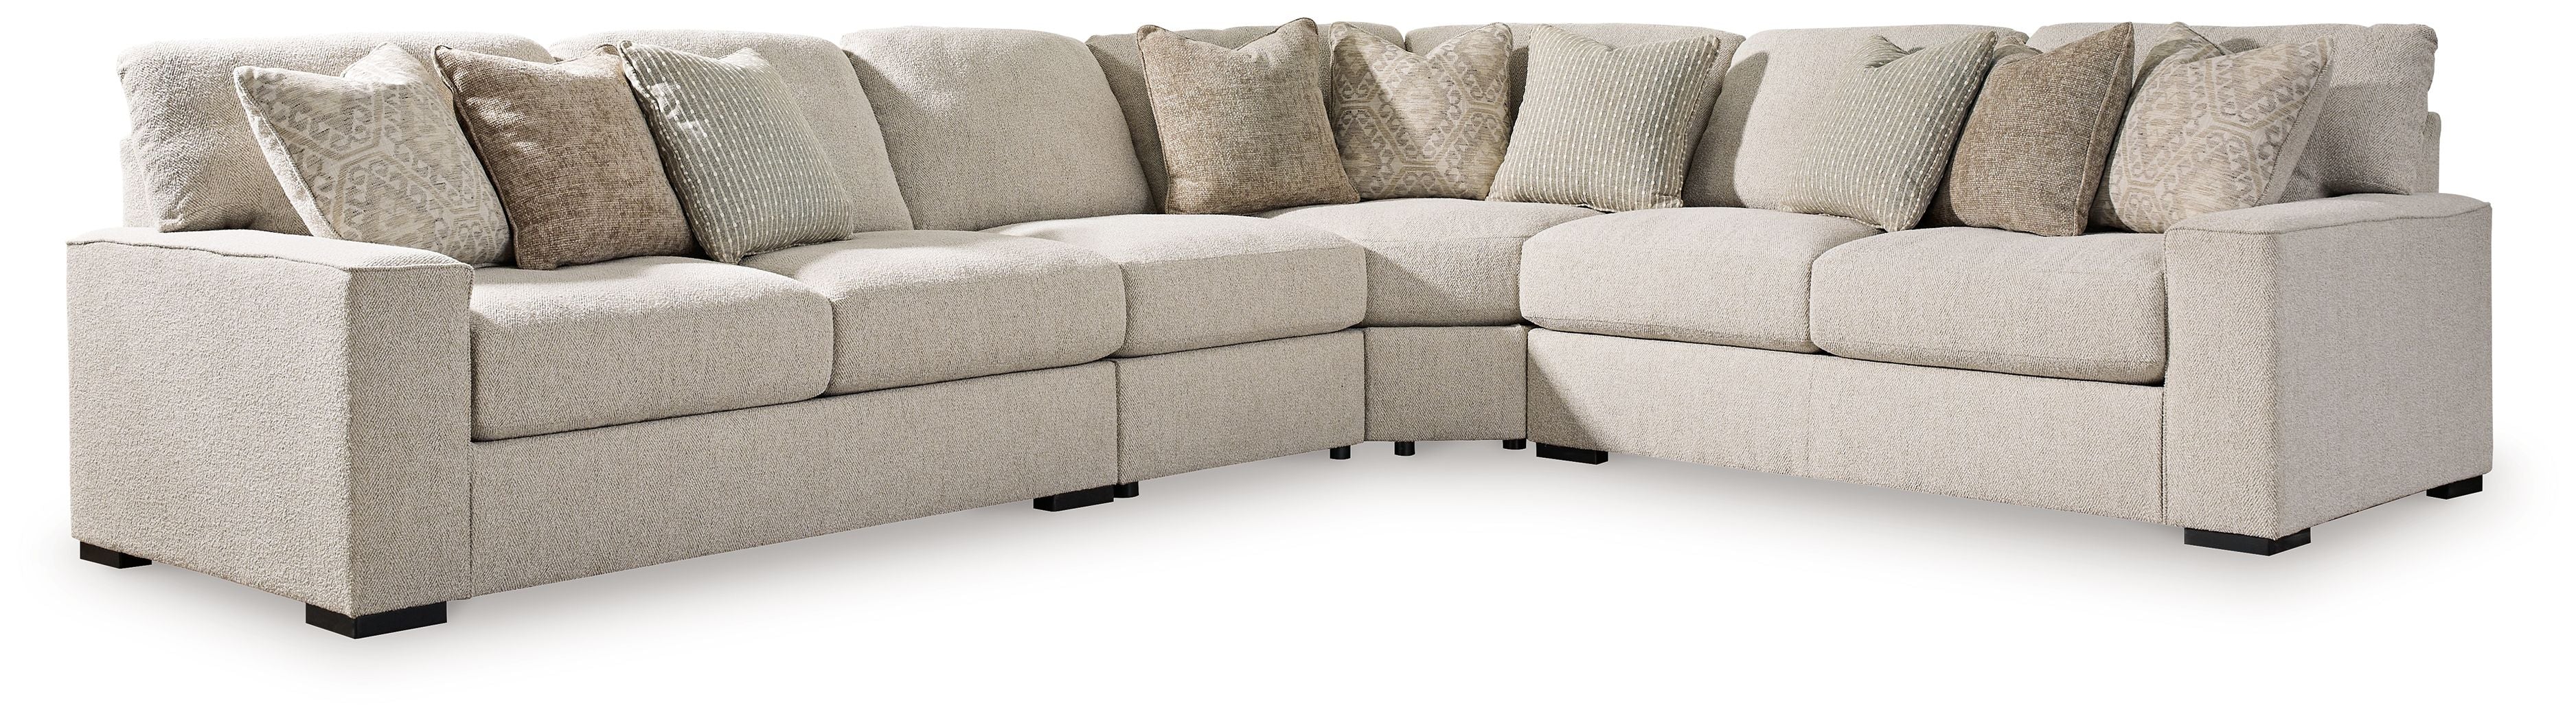 Signature Design by Ashley Ballyton Beige Sectional - Plush, Modern-Stationary Sectionals-American Furniture Outlet